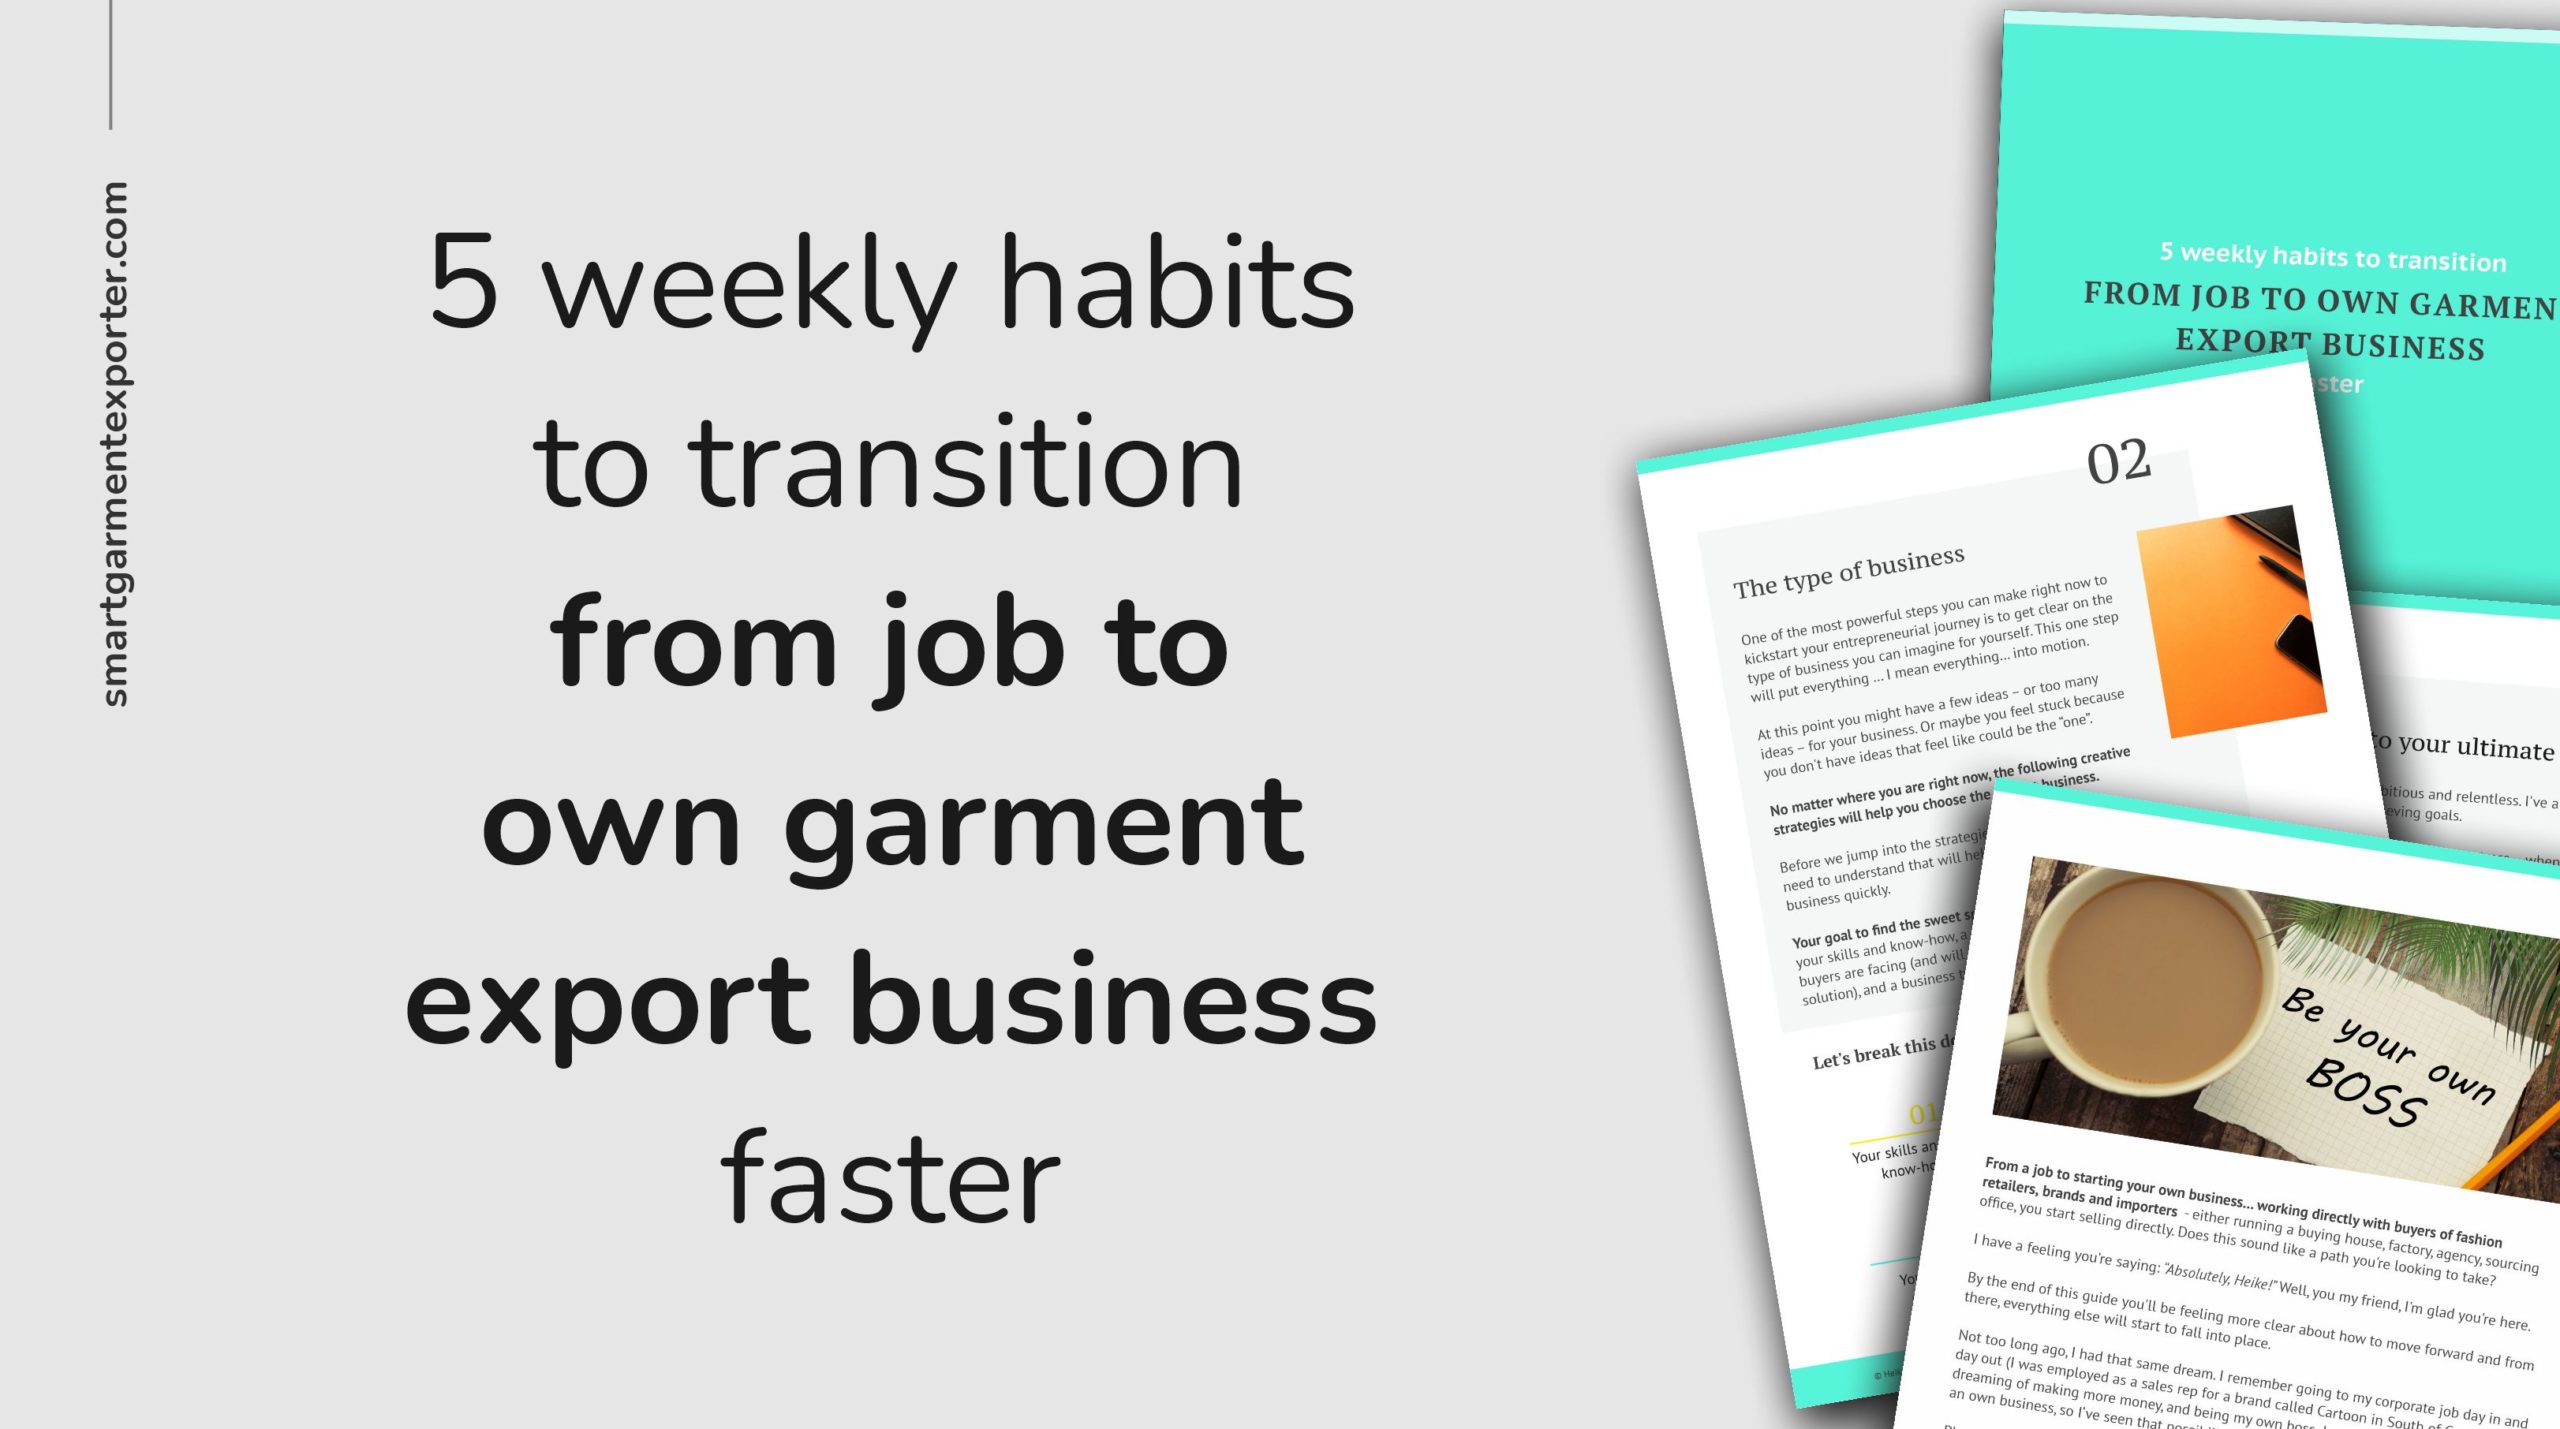 The 5 weekly habits to transition from job to own garment export business faster